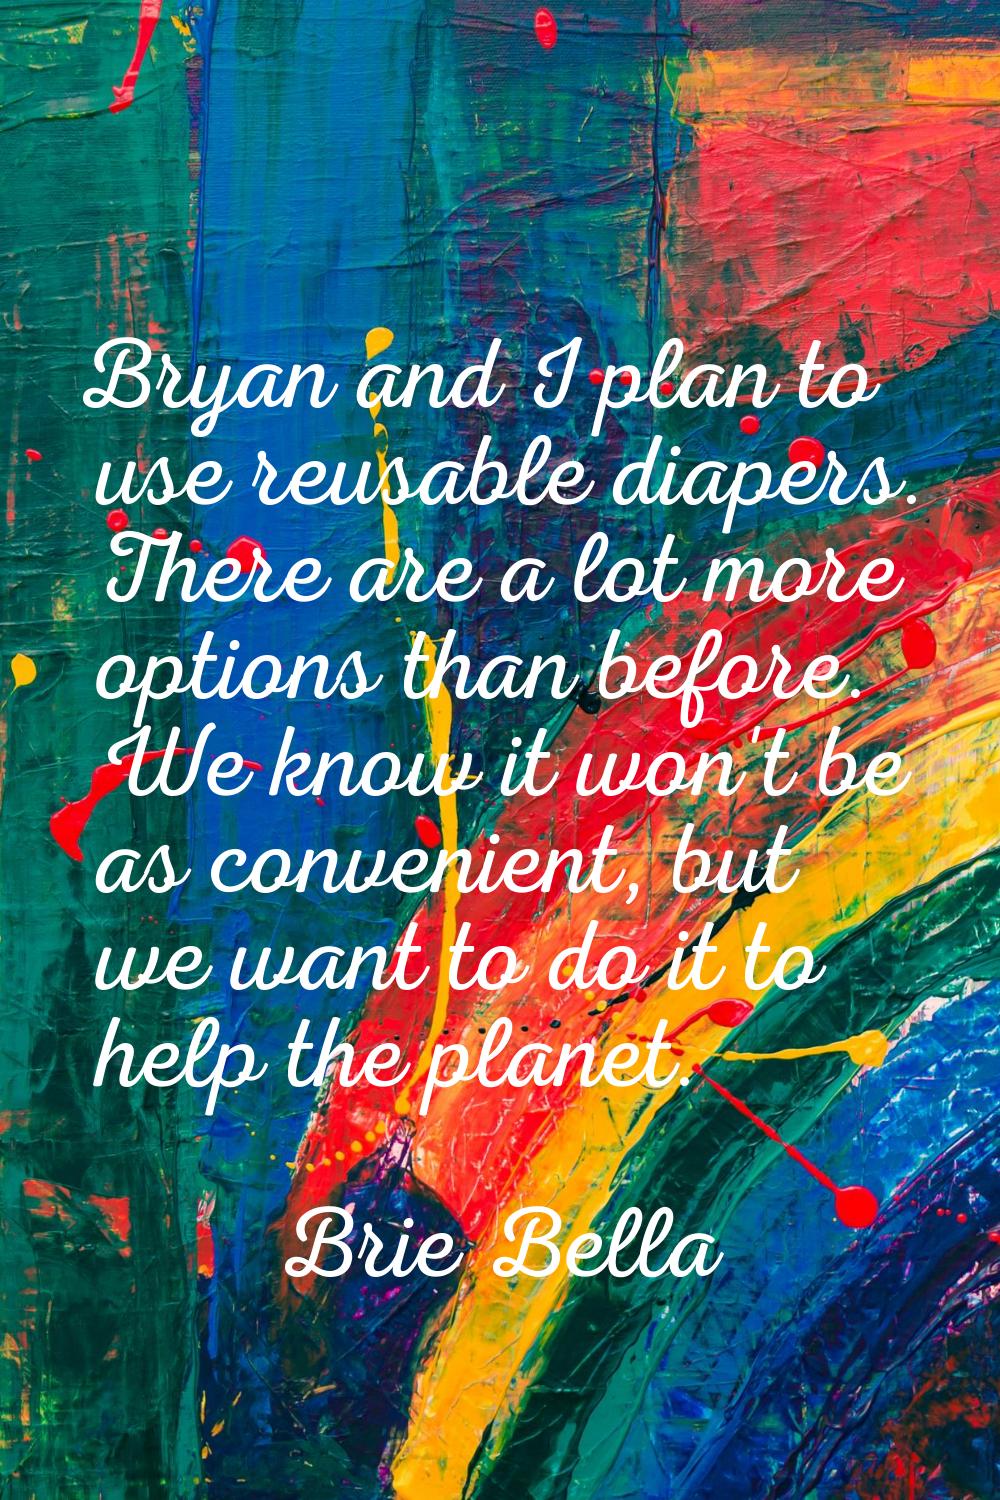 Bryan and I plan to use reusable diapers. There are a lot more options than before. We know it won'